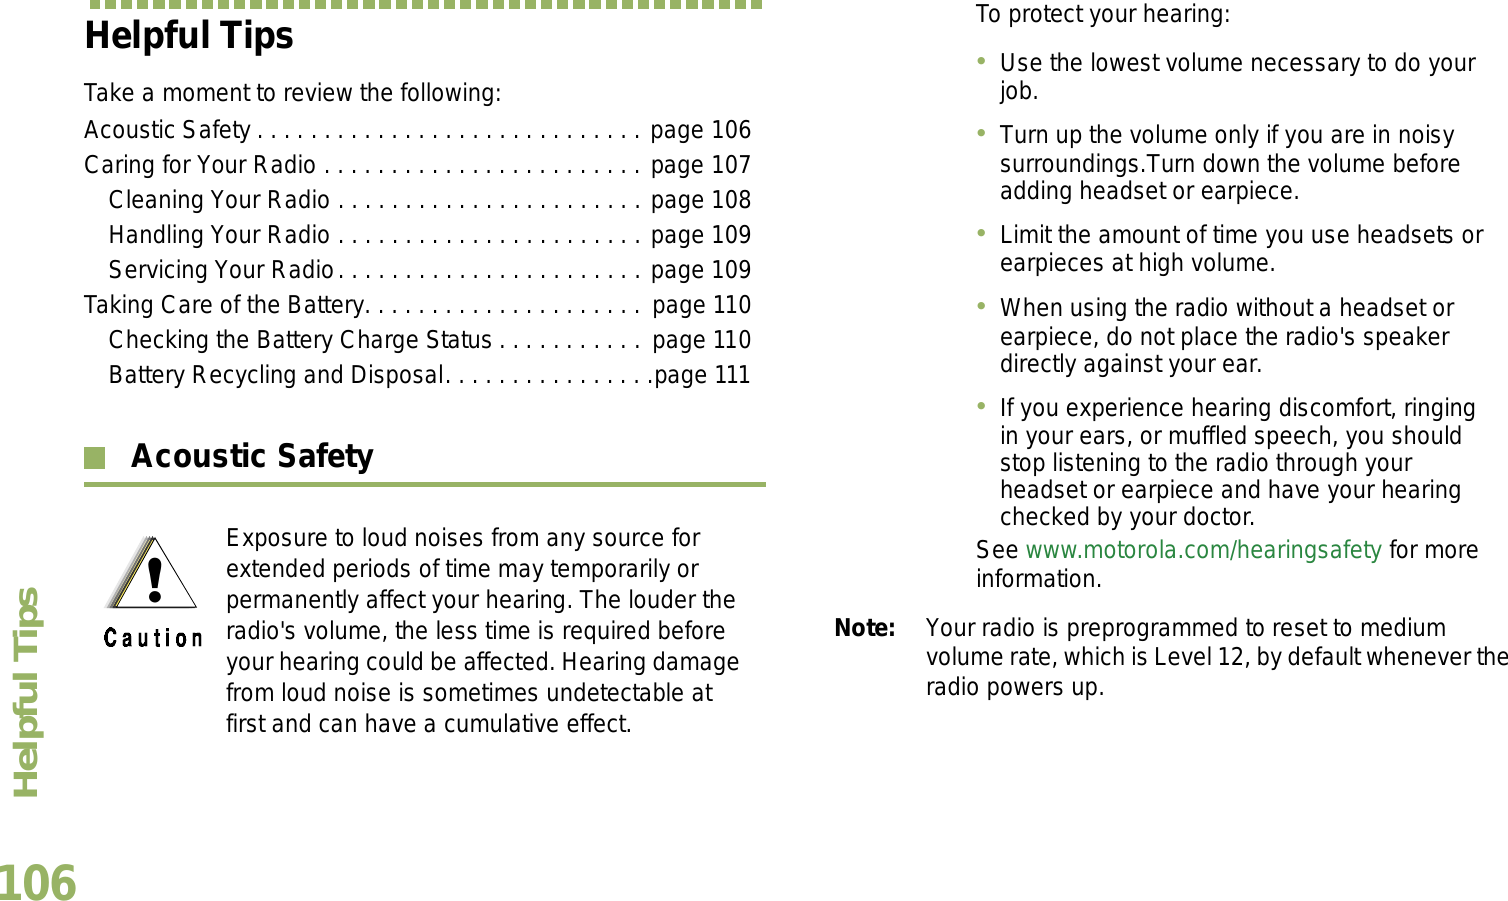 Helpful TipsEnglish106Helpful TipsTake a moment to review the following:Acoustic Safety . . . . . . . . . . . . . . . . . . . . . . . . . . . . . page 106Caring for Your Radio . . . . . . . . . . . . . . . . . . . . . . . . page 107Cleaning Your Radio . . . . . . . . . . . . . . . . . . . . . . . page 108Handling Your Radio . . . . . . . . . . . . . . . . . . . . . . . page 109Servicing Your Radio. . . . . . . . . . . . . . . . . . . . . . . page 109Taking Care of the Battery. . . . . . . . . . . . . . . . . . . . .  page 110Checking the Battery Charge Status . . . . . . . . . . . page 110Battery Recycling and Disposal. . . . . . . . . . . . . . . .page 111 Acoustic Safety Note: Your radio is preprogrammed to reset to medium volume rate, which is Level 12, by default whenever the radio powers up. Exposure to loud noises from any source for extended periods of time may temporarily or permanently affect your hearing. The louder the radio&apos;s volume, the less time is required before your hearing could be affected. Hearing damage from loud noise is sometimes undetectable at first and can have a cumulative effect.To protect your hearing:Use the lowest volume necessary to do your job.Turn up the volume only if you are in noisy surroundings.Turn down the volume before adding headset or earpiece.Limit the amount of time you use headsets or earpieces at high volume.When using the radio without a headset or earpiece, do not place the radio&apos;s speaker directly against your ear.If you experience hearing discomfort, ringing in your ears, or muffled speech, you should stop listening to the radio through your headset or earpiece and have your hearing checked by your doctor.See www.motorola.com/hearingsafety for more information.